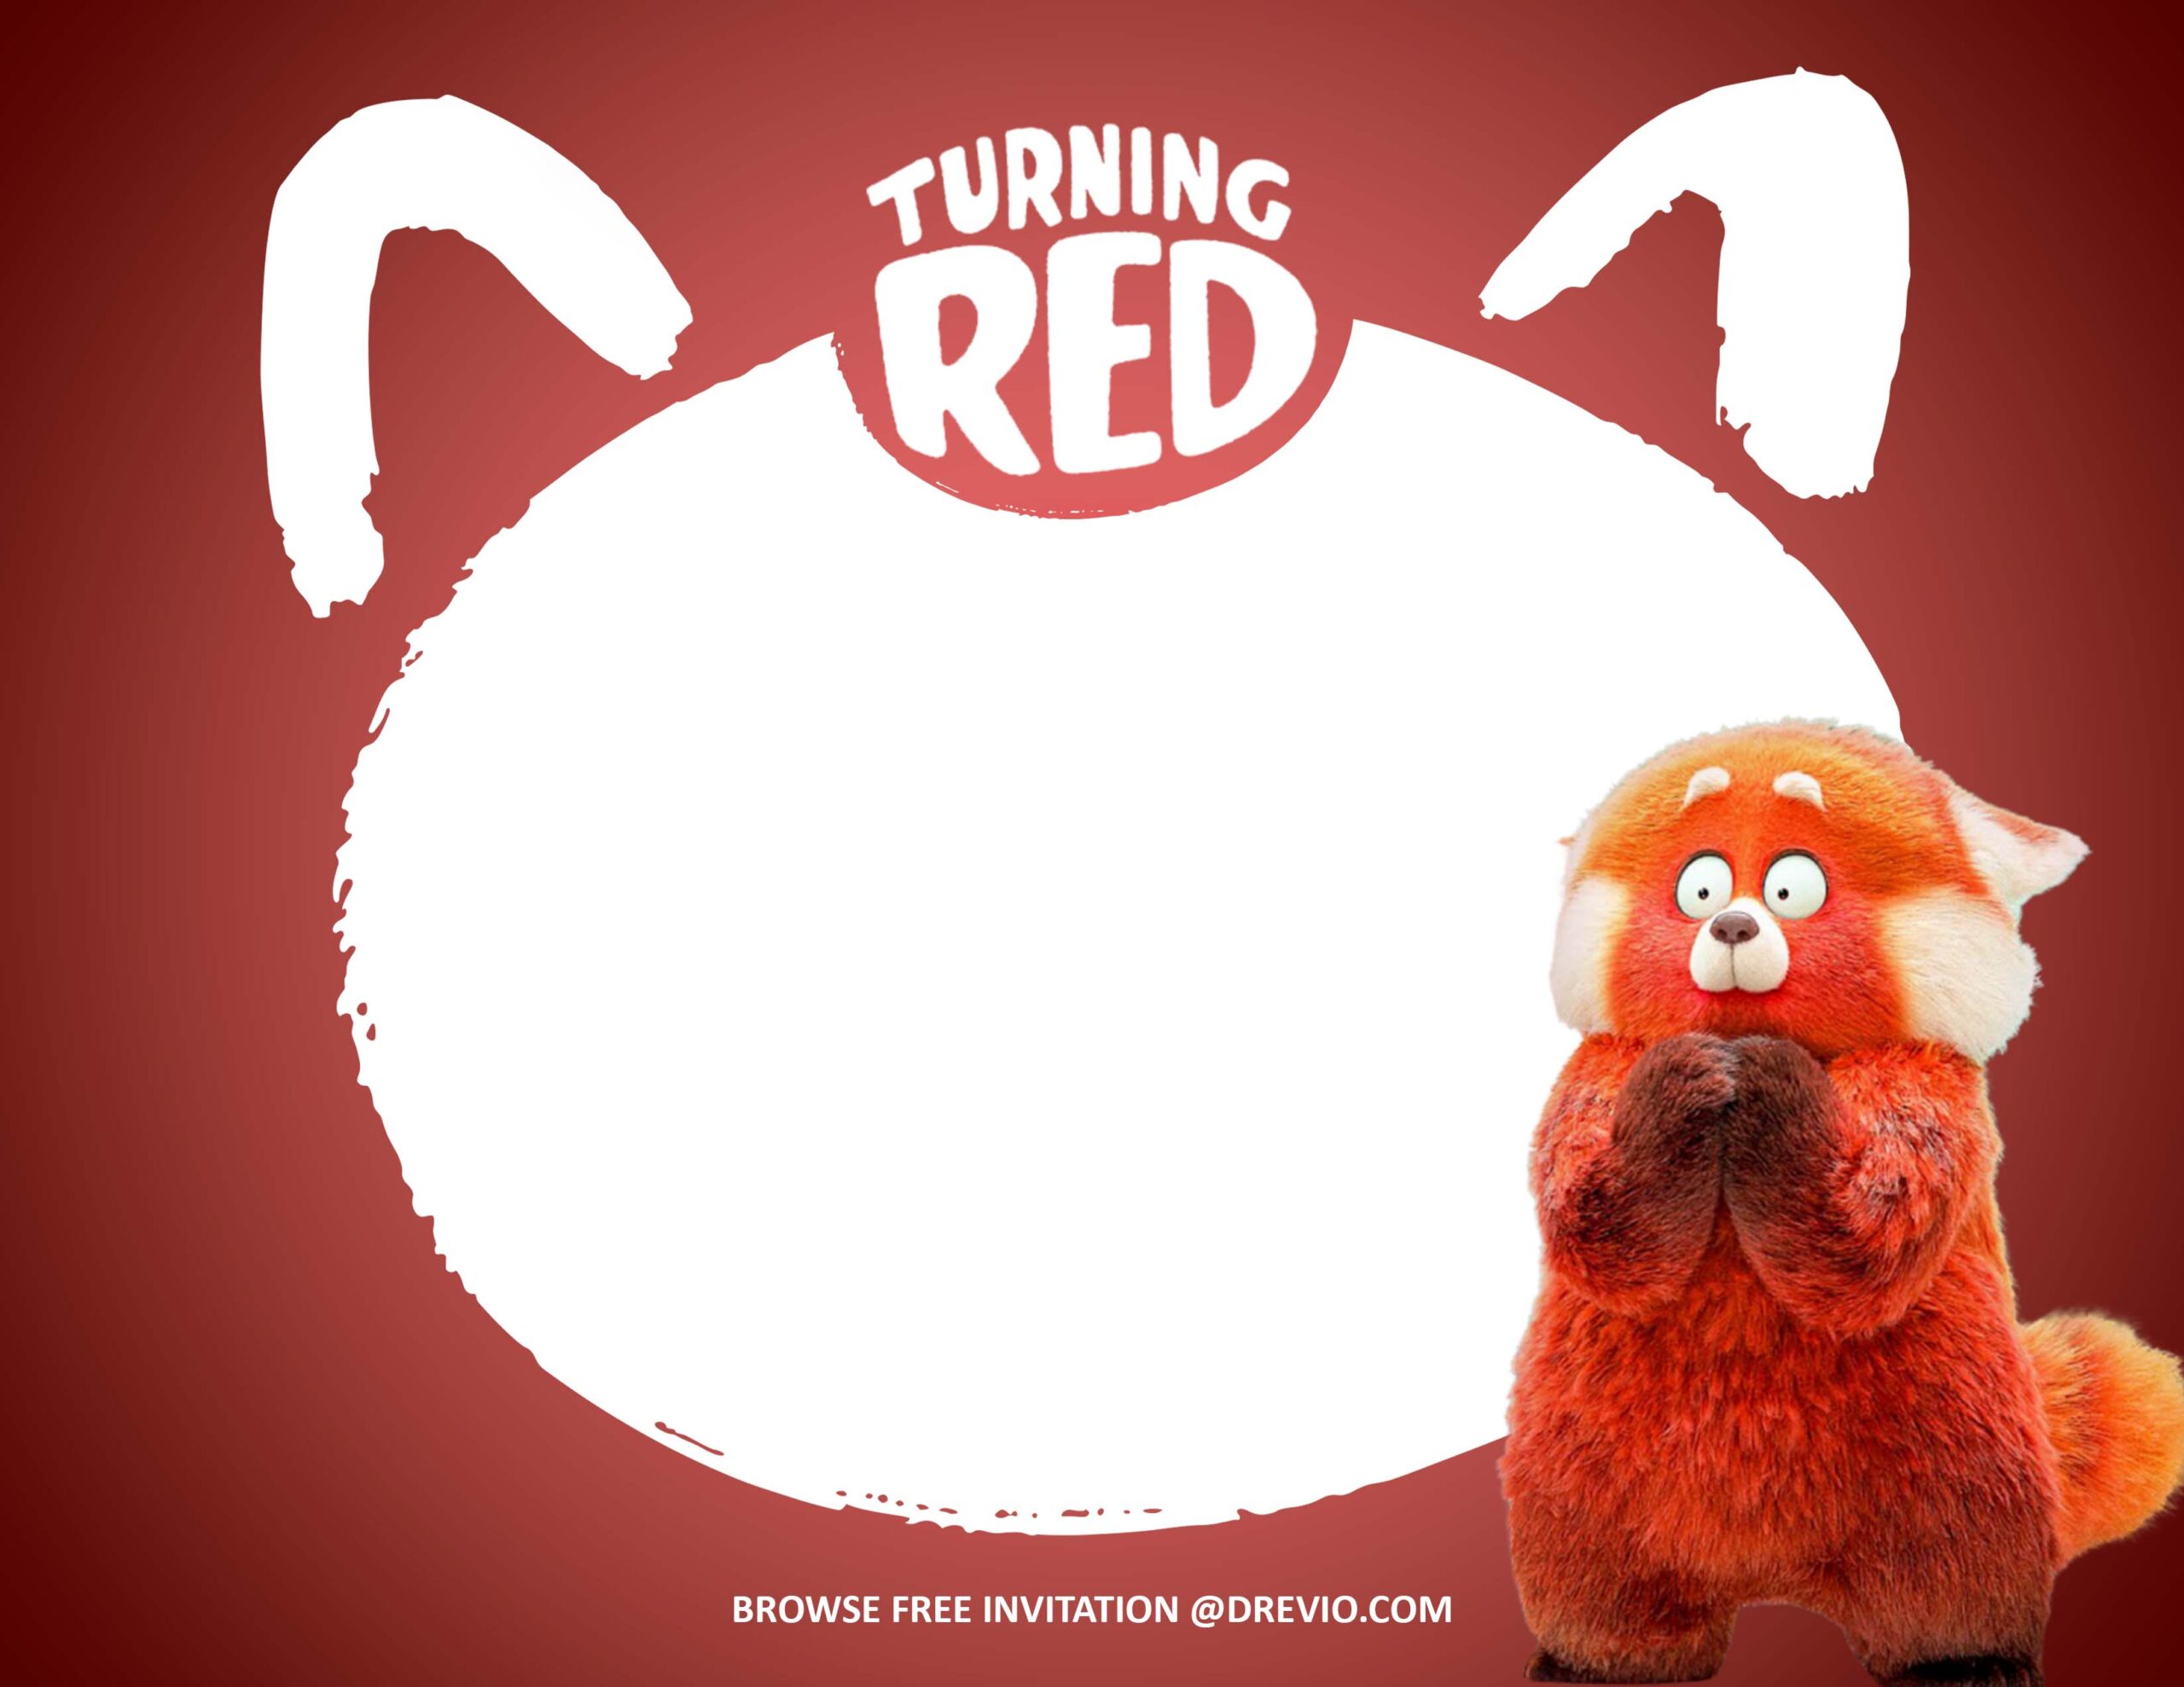 Turning Red Themed Birthday Party Ideas Download Hundreds FREE